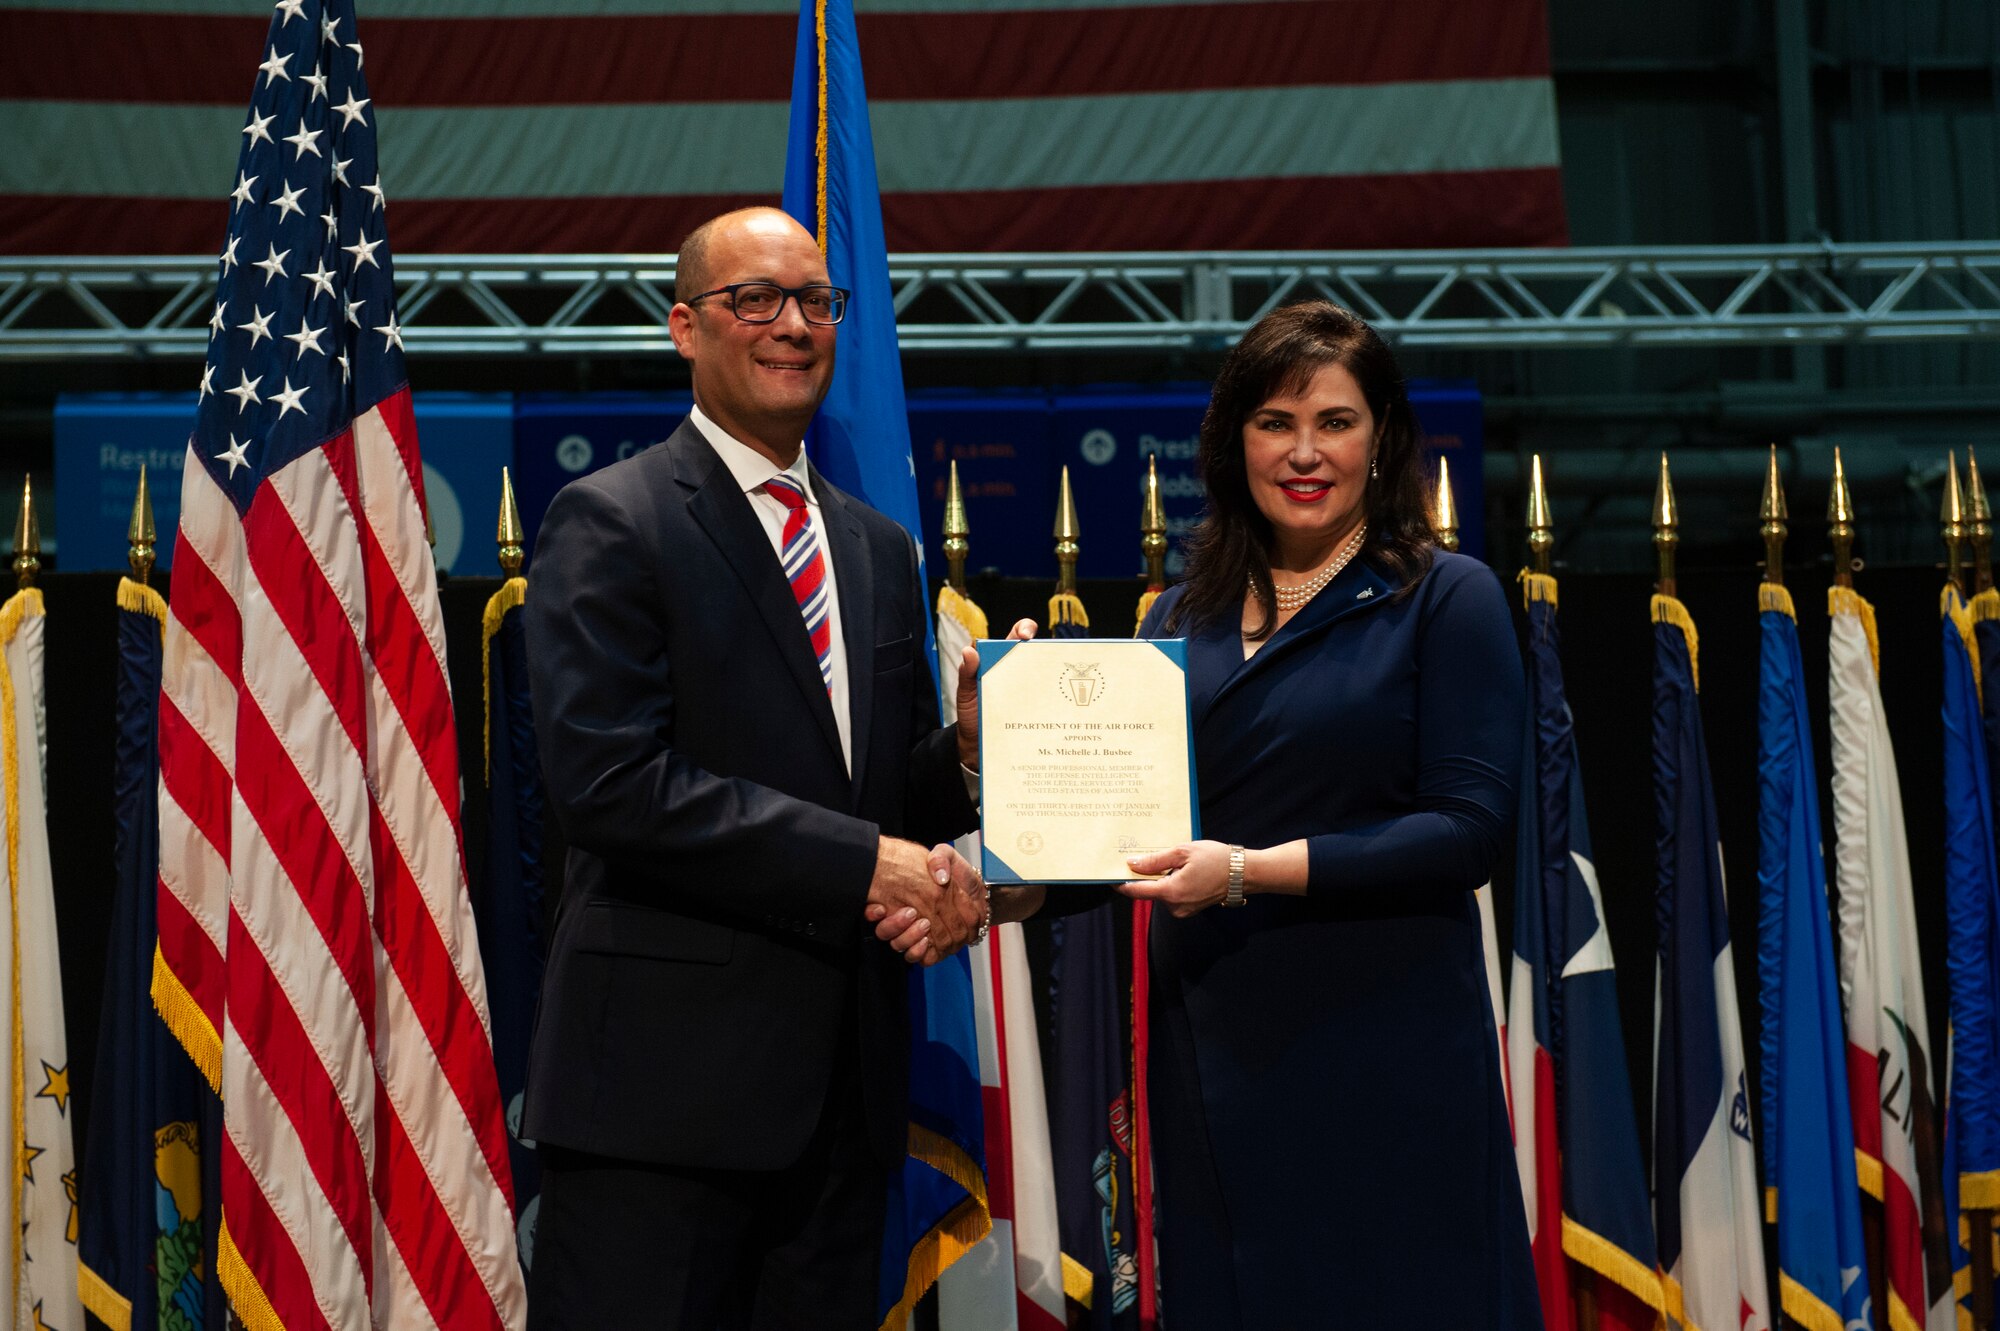 Michelle Busbee, Technical Advisor for Air and Cyberspace Intelligence at the National Air and Space Intelligence Center, receives a certificate during her promotion ceremony at the National Museum of the United States Air Force, Wright-Patterson Air Force Base, Ohio, June 30, 2021. The joint ceremony honored both Busbee and Dr. Brenner, Technical Advisor for Geospatial and Signatures Intelligence at NASIC, in their promotion to Defense Intelligence Senior Level executives.